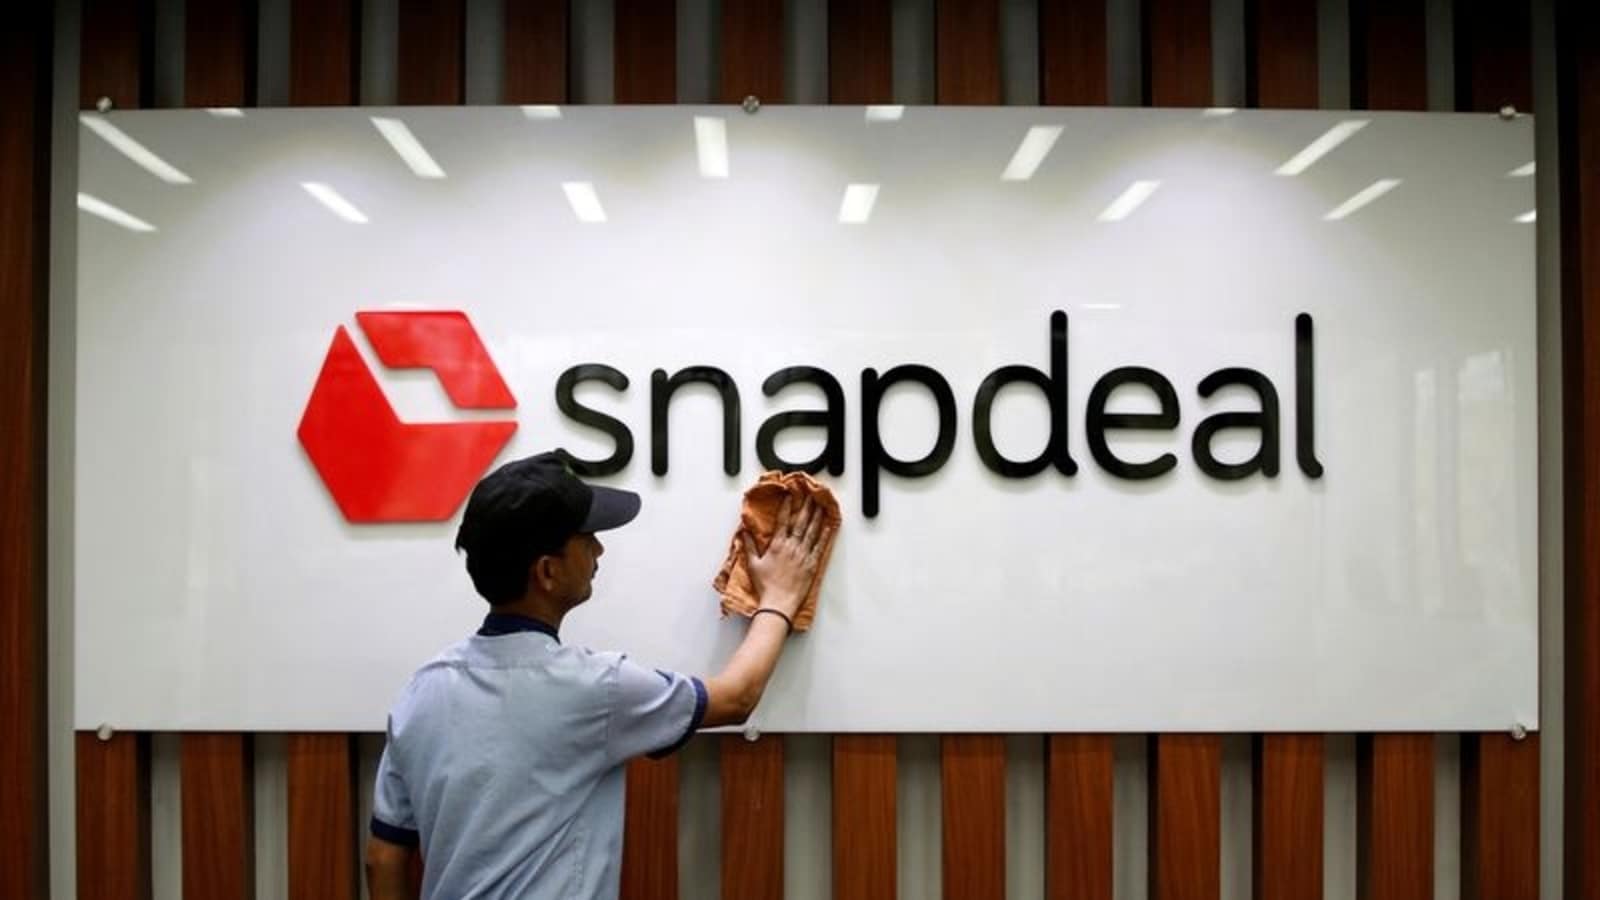 softbank-backed snapdeal files for ipo - hindustan times